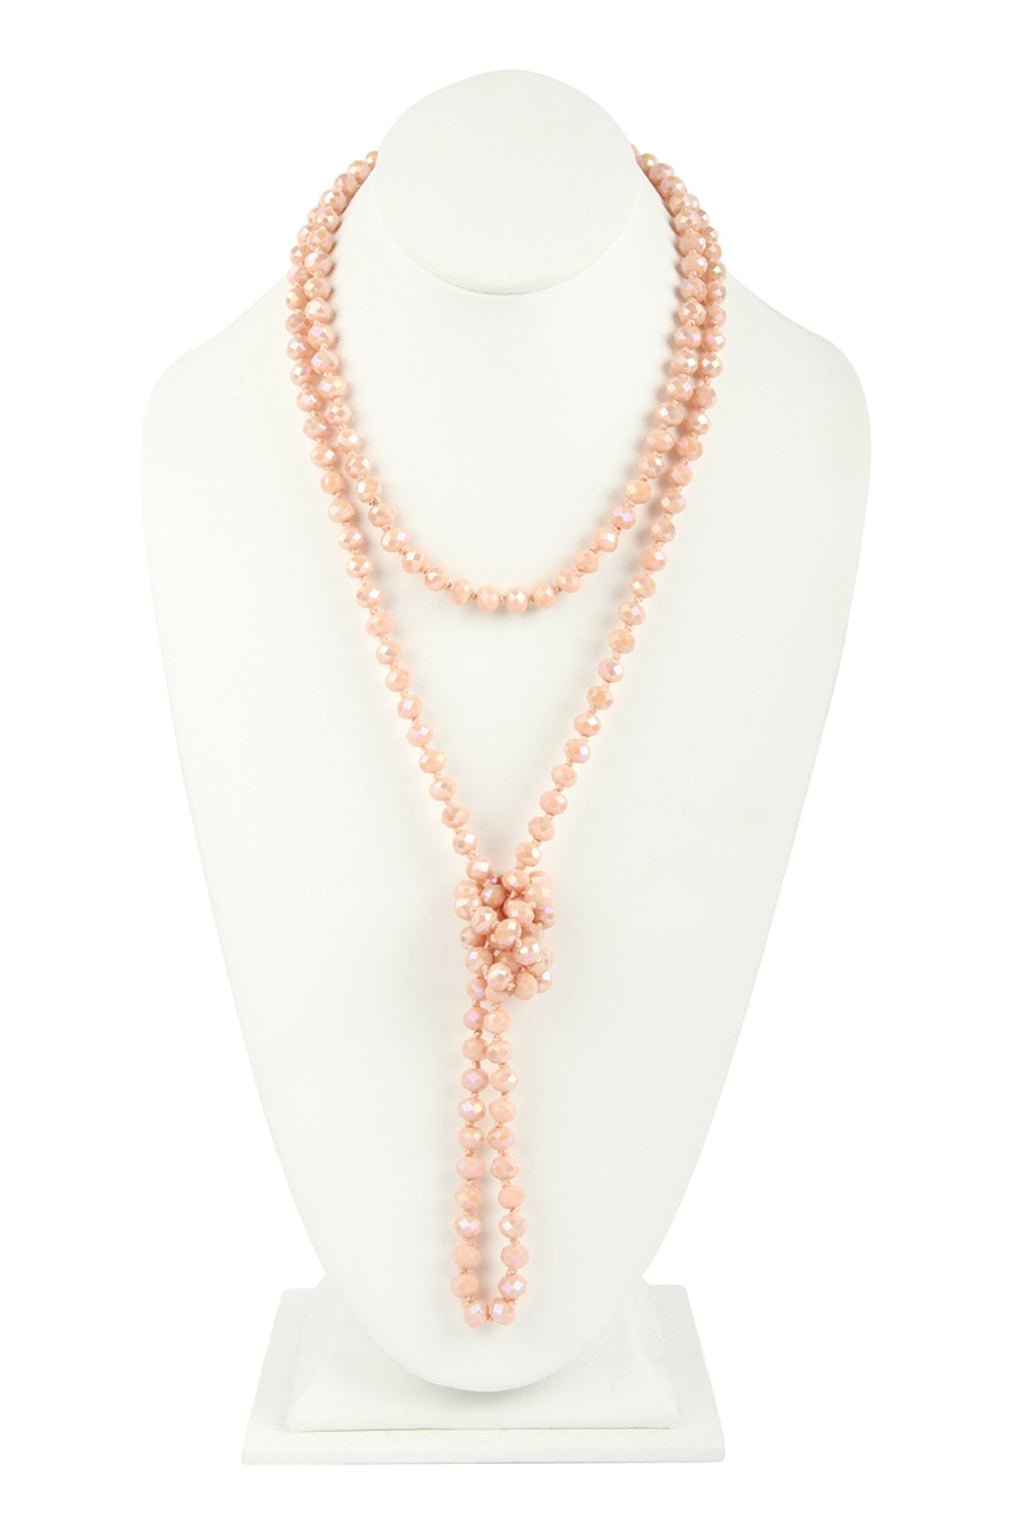 Peach Longline Hand Knotted Necklace - Pack of 6